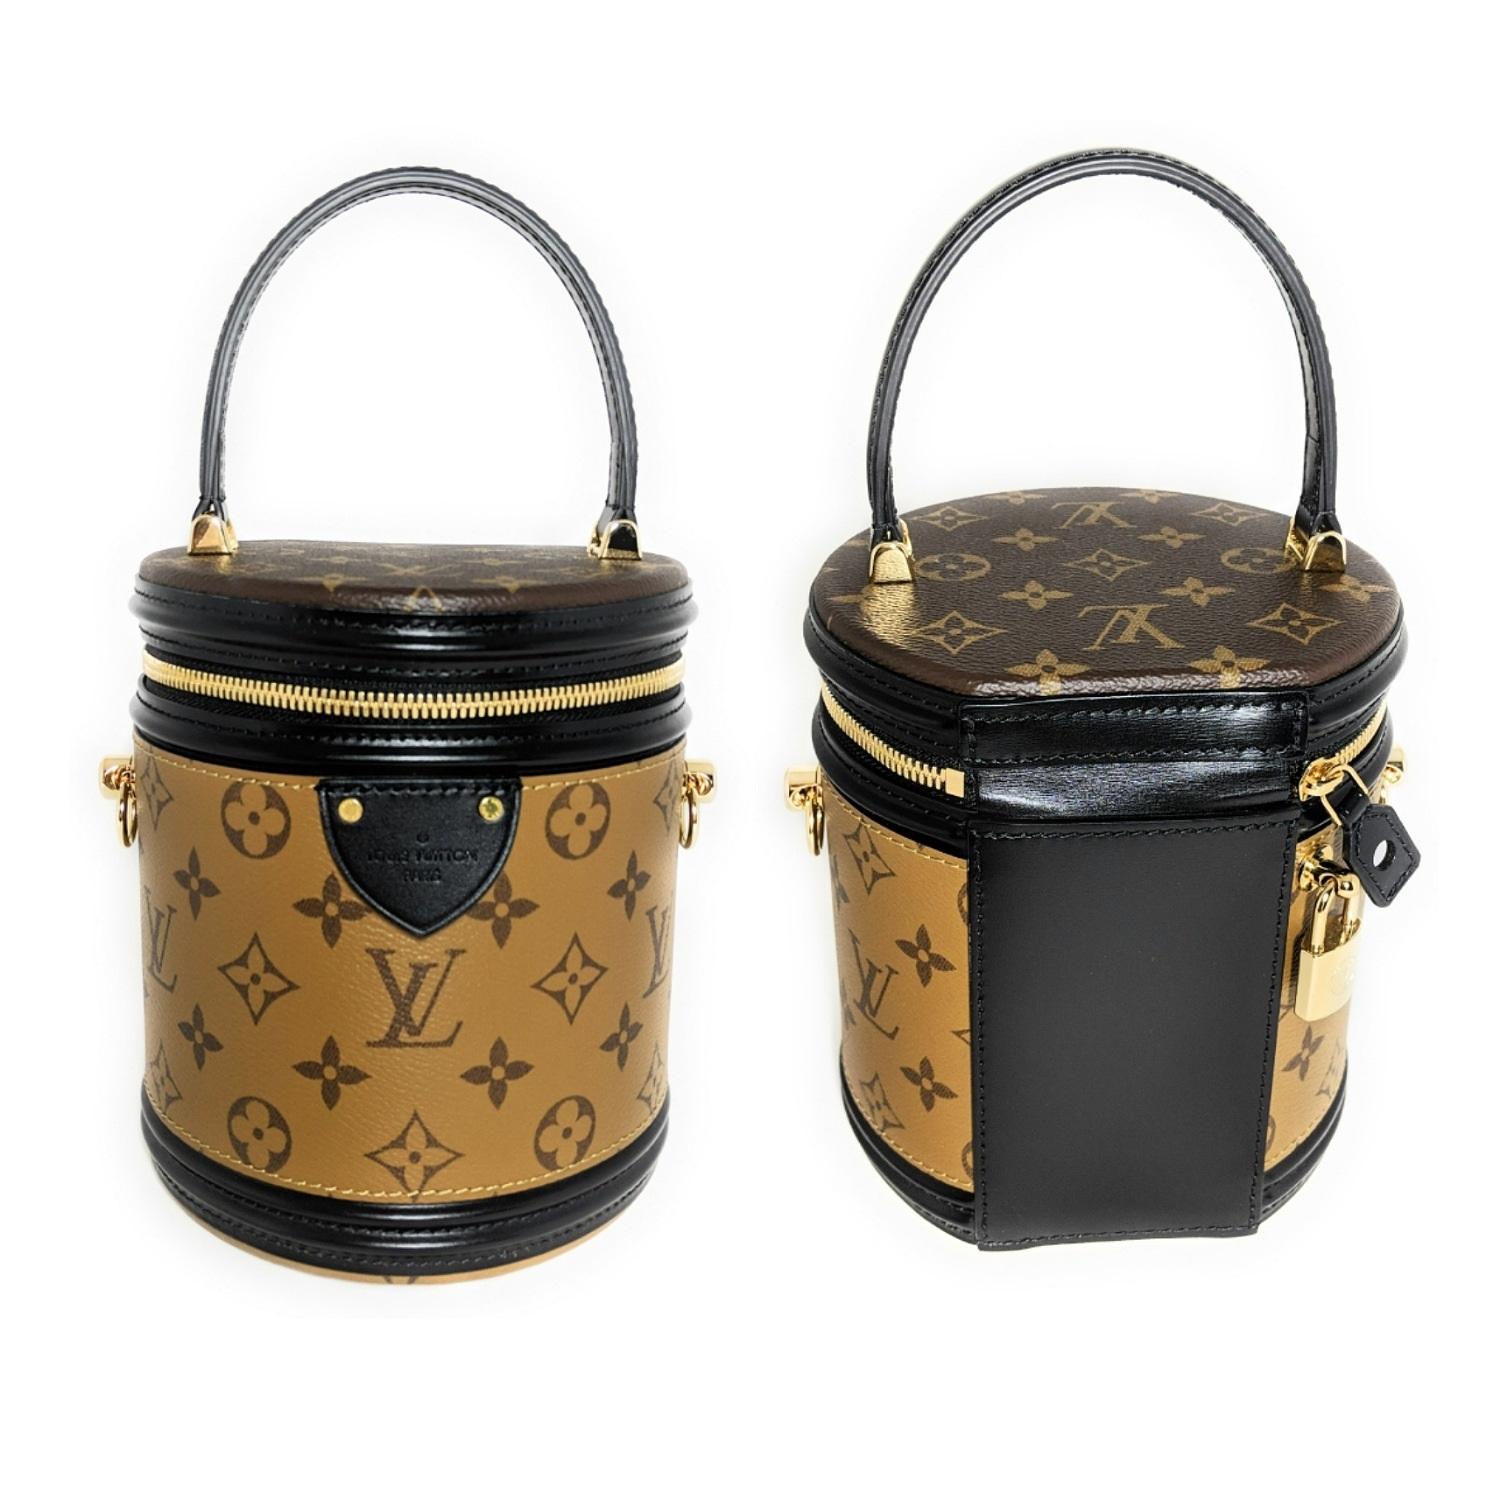 This fabulous and current Louis Vuitton bag was made in the shape of the historical LV beauty case which shares the same name. Designer Nicolas Ghesquiere has revived a long standing classic with this stylish Cannes bag. The small sized bag features